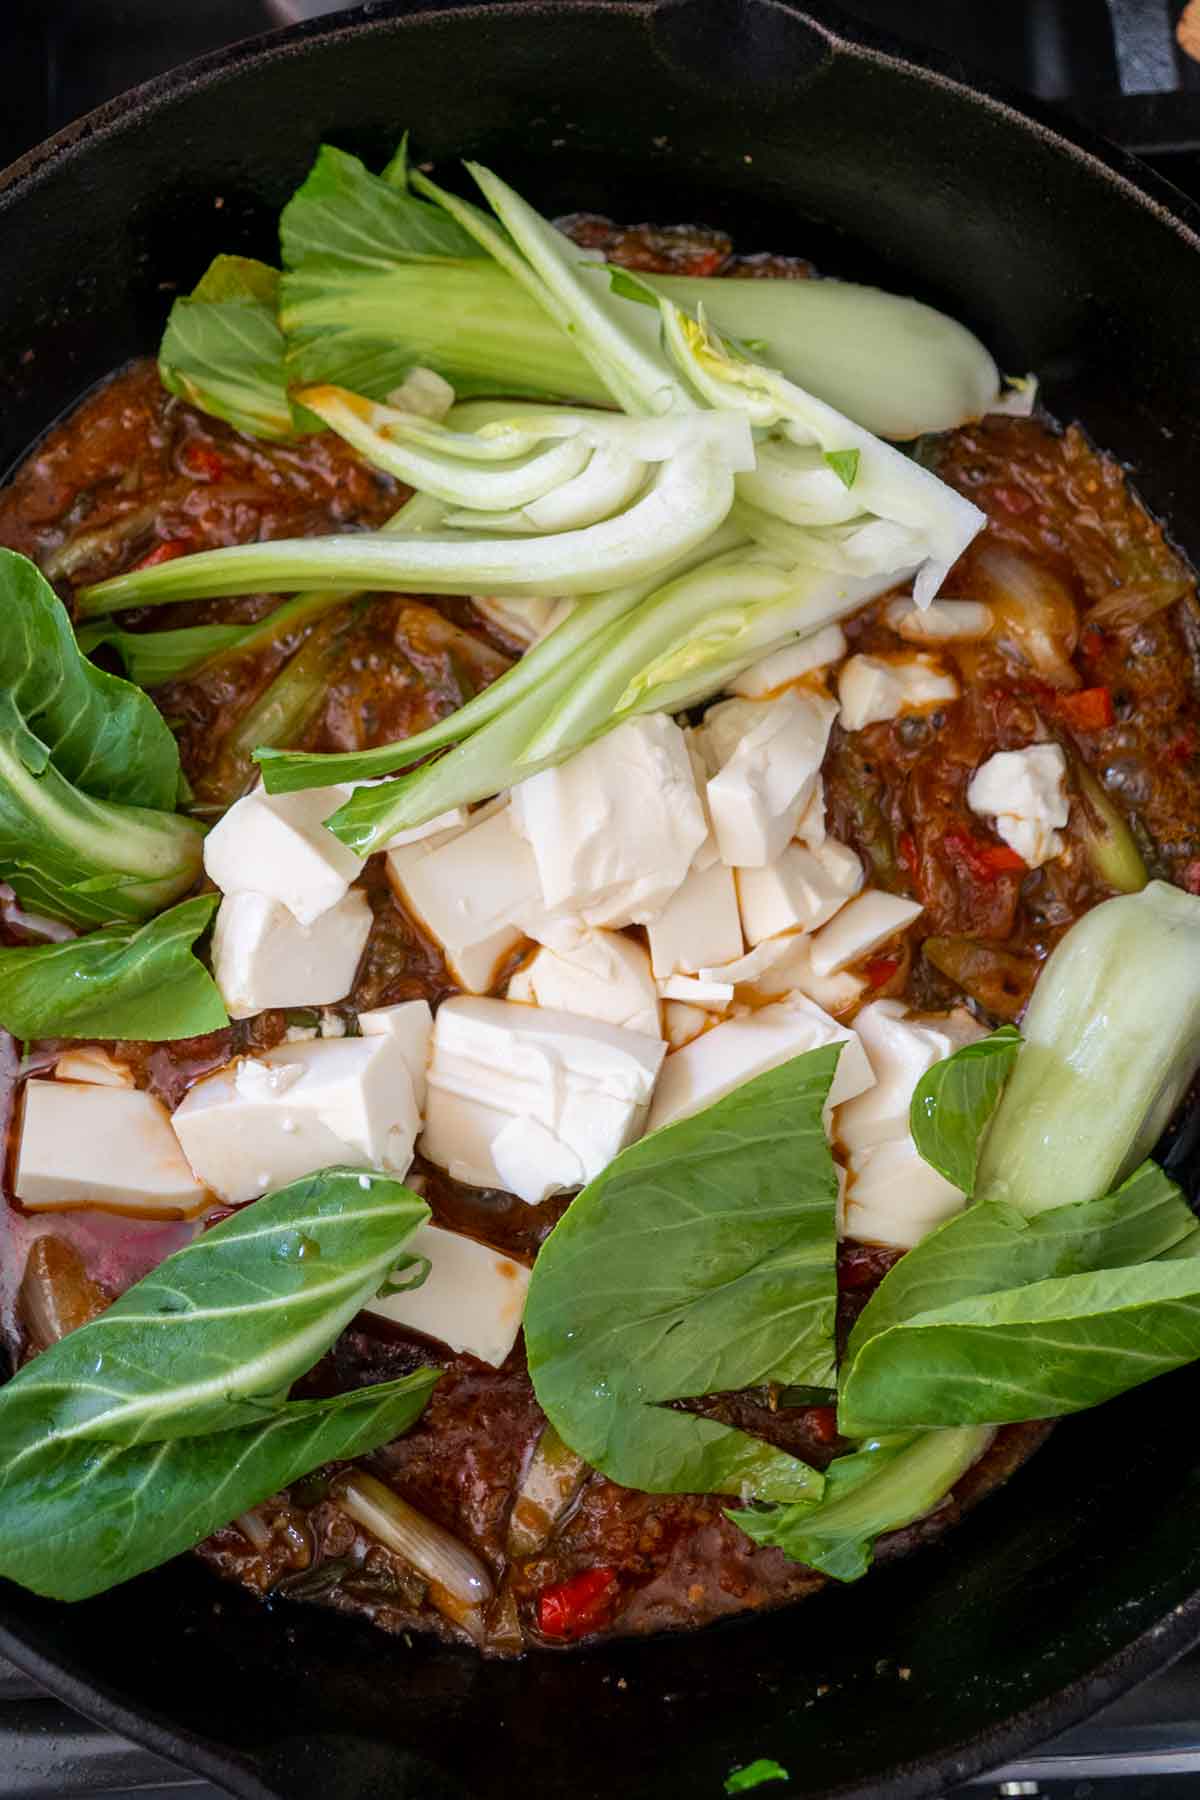 bok choy and cubed tofu added to schezwan sauce in a skillet